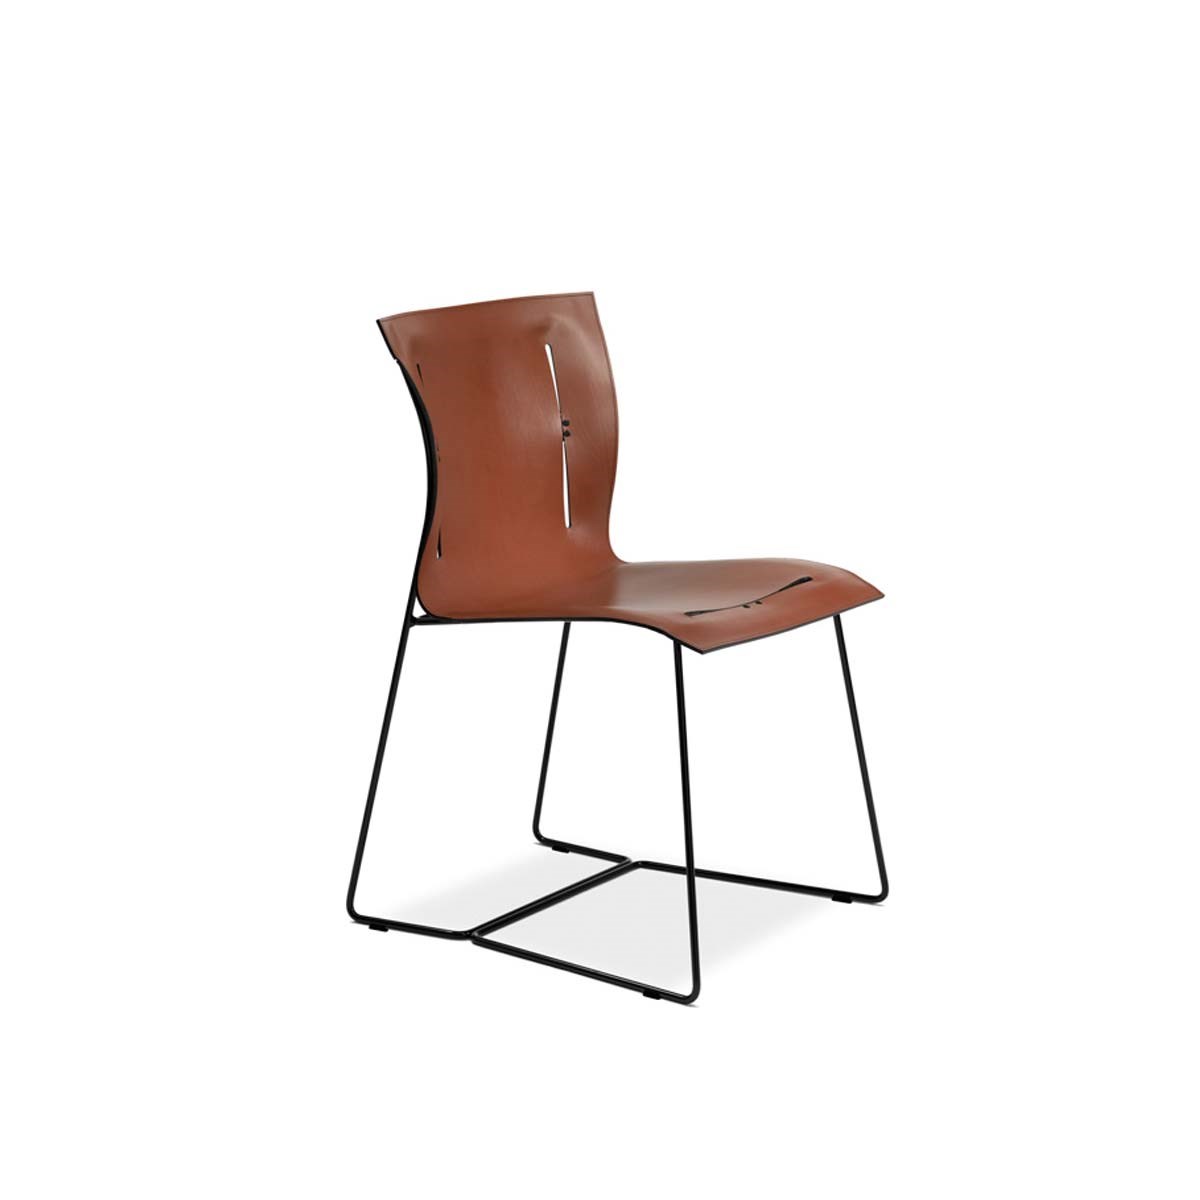 Walter-Knoll-EOOS-Cuoio-Dining-Chair-Matisse-1